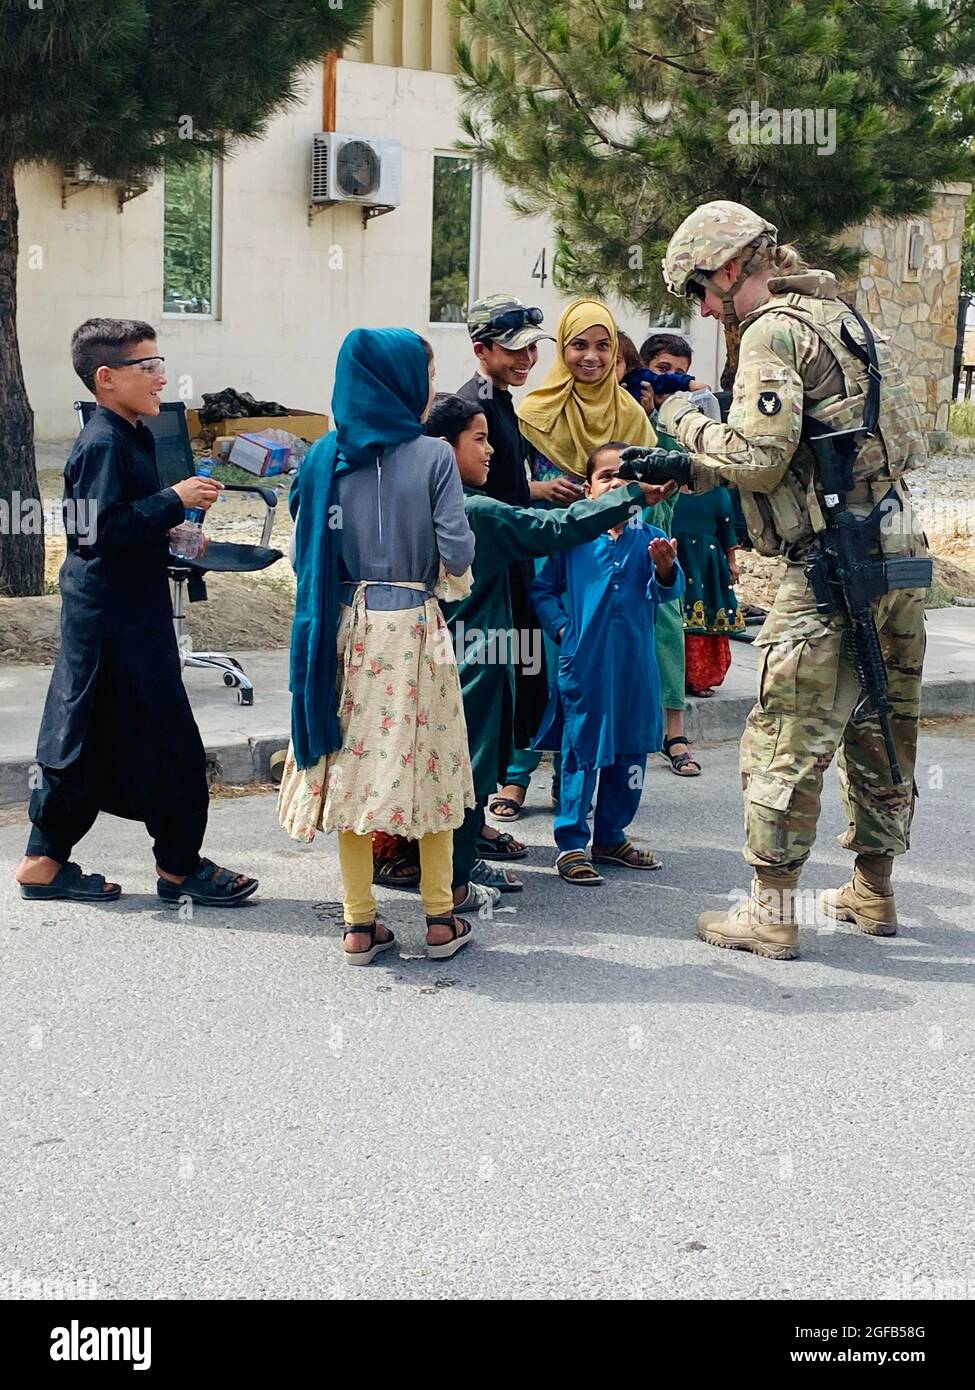 1st Lt. Michelle Jaeger, a platoon leader with the Minnesota National Guard's A Company, 1st Combined Arms Battalion, 194th Armor Regiment, interacts with Afghan children as part of operations at Hamid Karzai International Airport on August 21, 2021.   Minnesota Soldiers are providing humanitarian assistance to U.S. citizens, special immigrant visa holders, and their families.   Approximately 1,100 Soldiers from Task Force 1-194 deployed to the Middle East in early 2021 for a nine-month mission in support of Operation Spartan Shield. While deployed, the Soldiers assumed responsibilities within Stock Photo